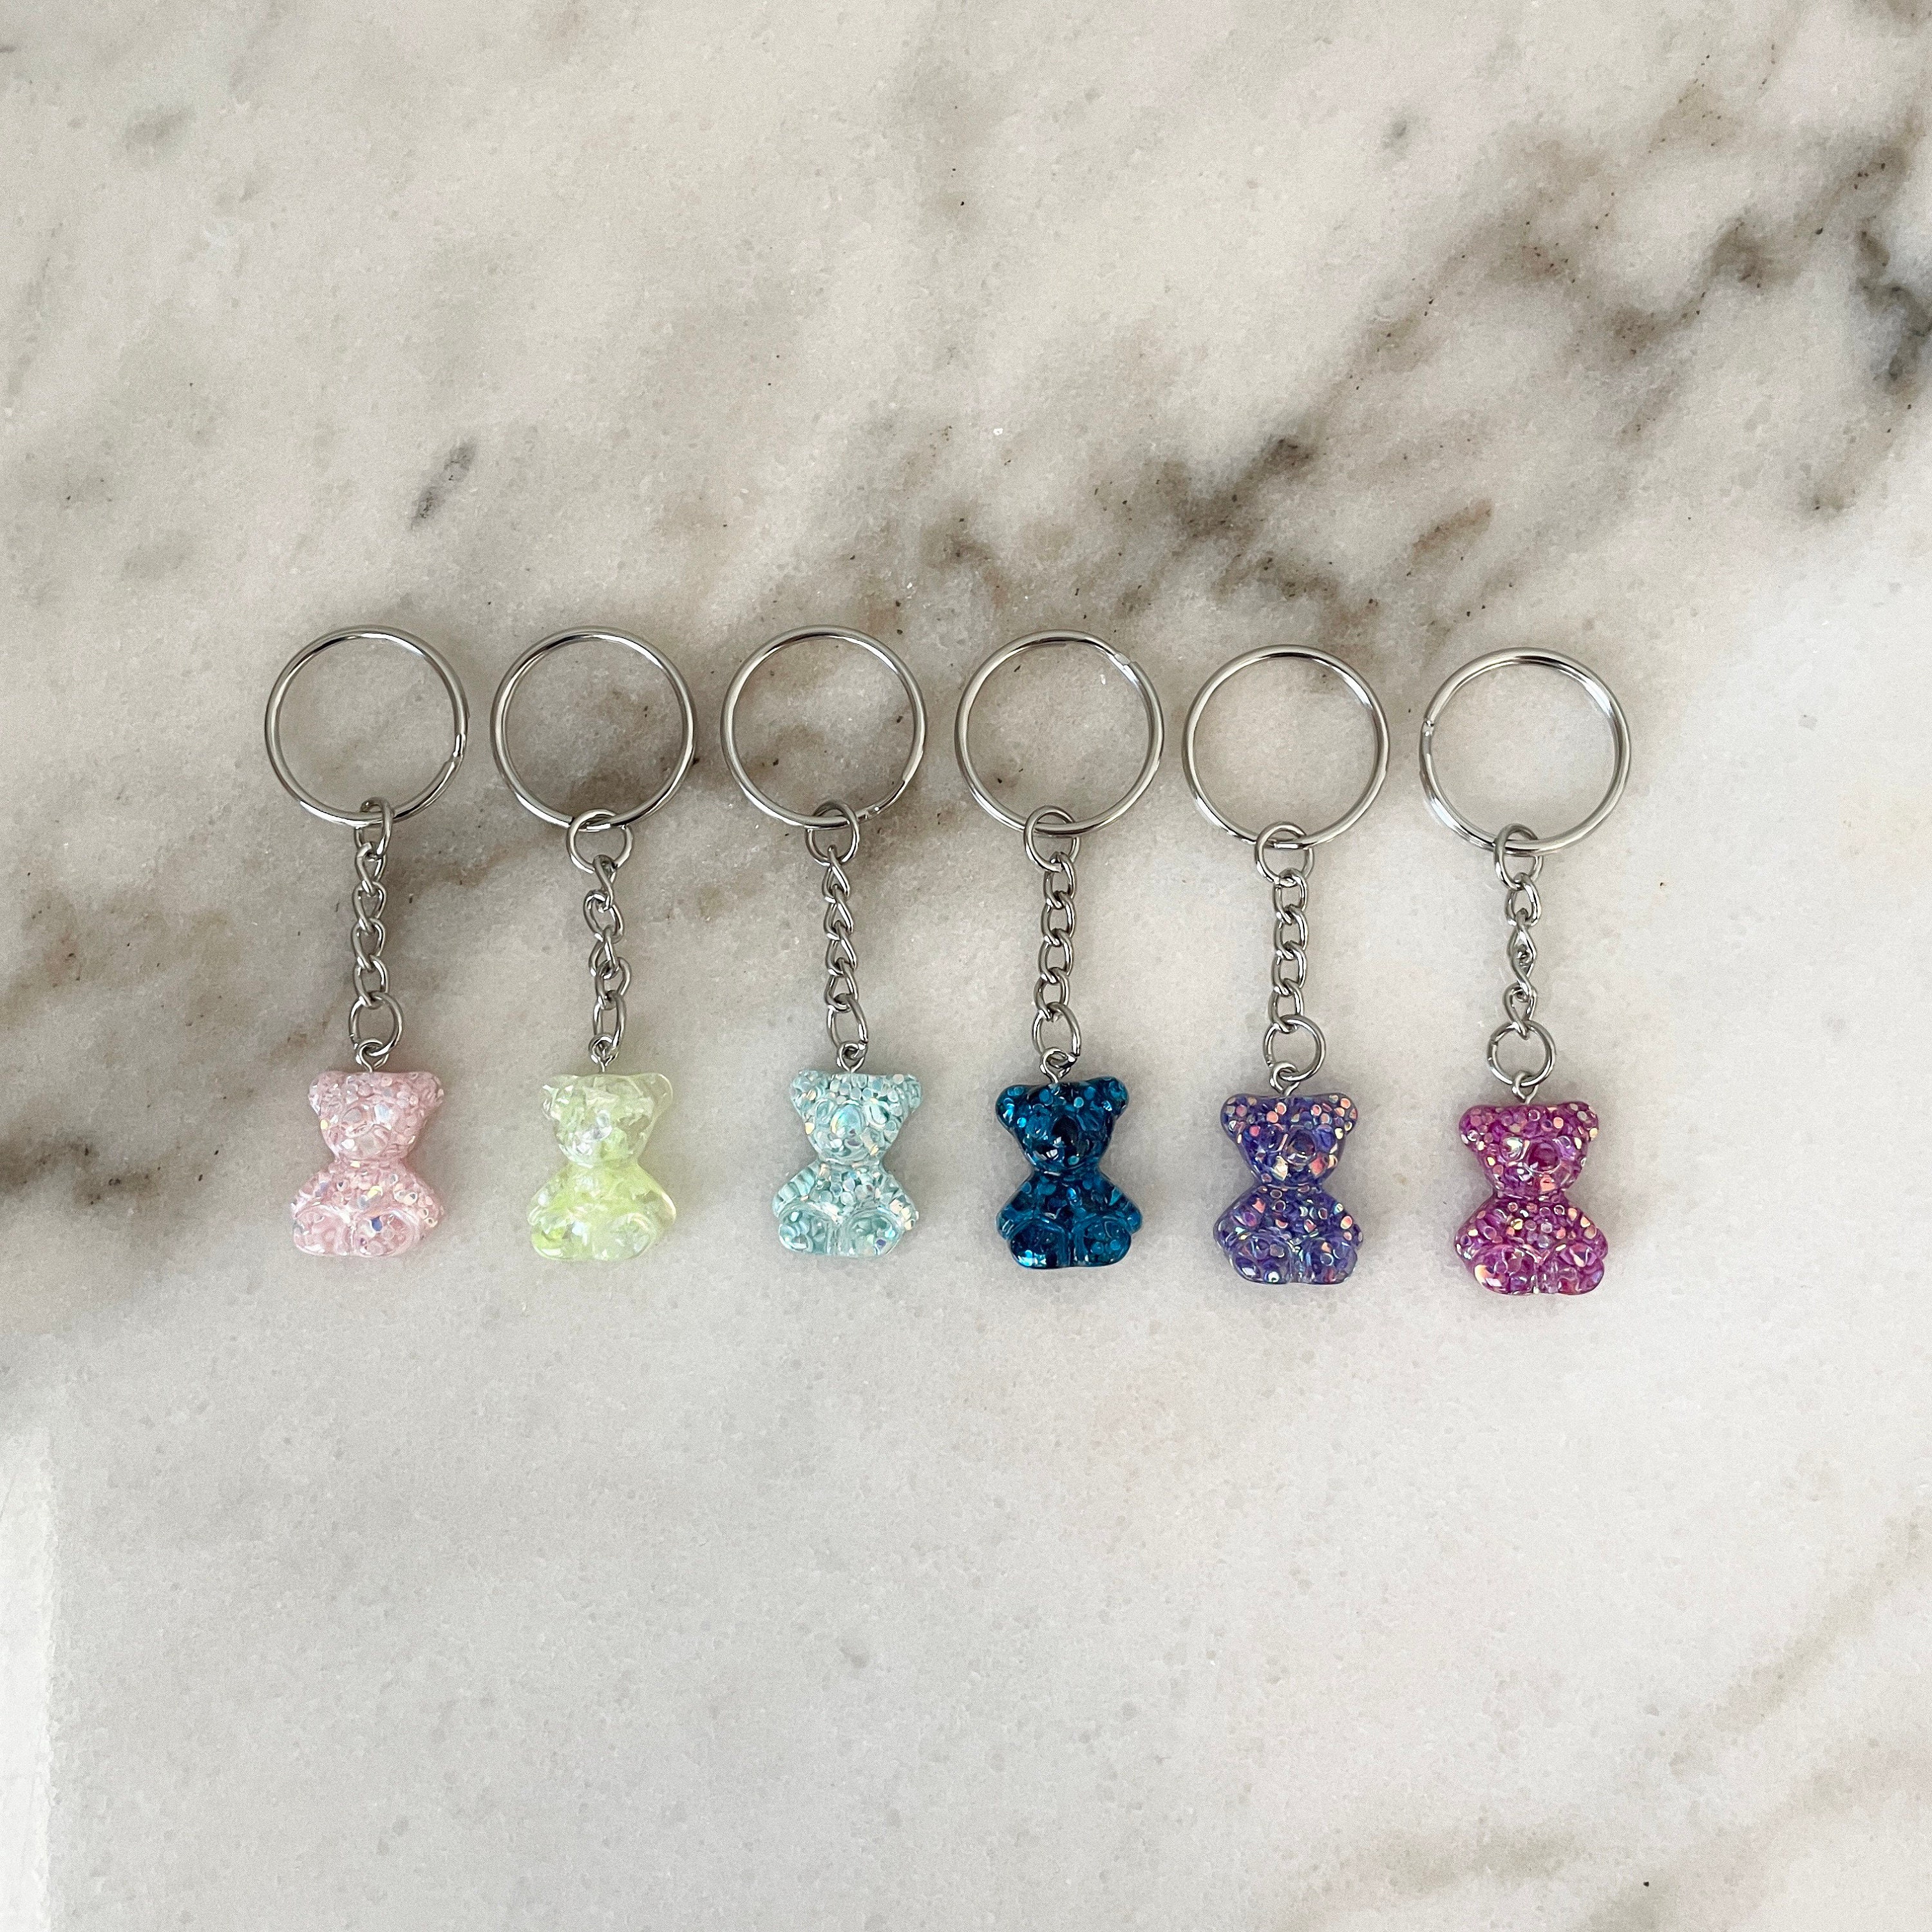 Bougie Bear charm Keyring - 3 designs – GLO Cases